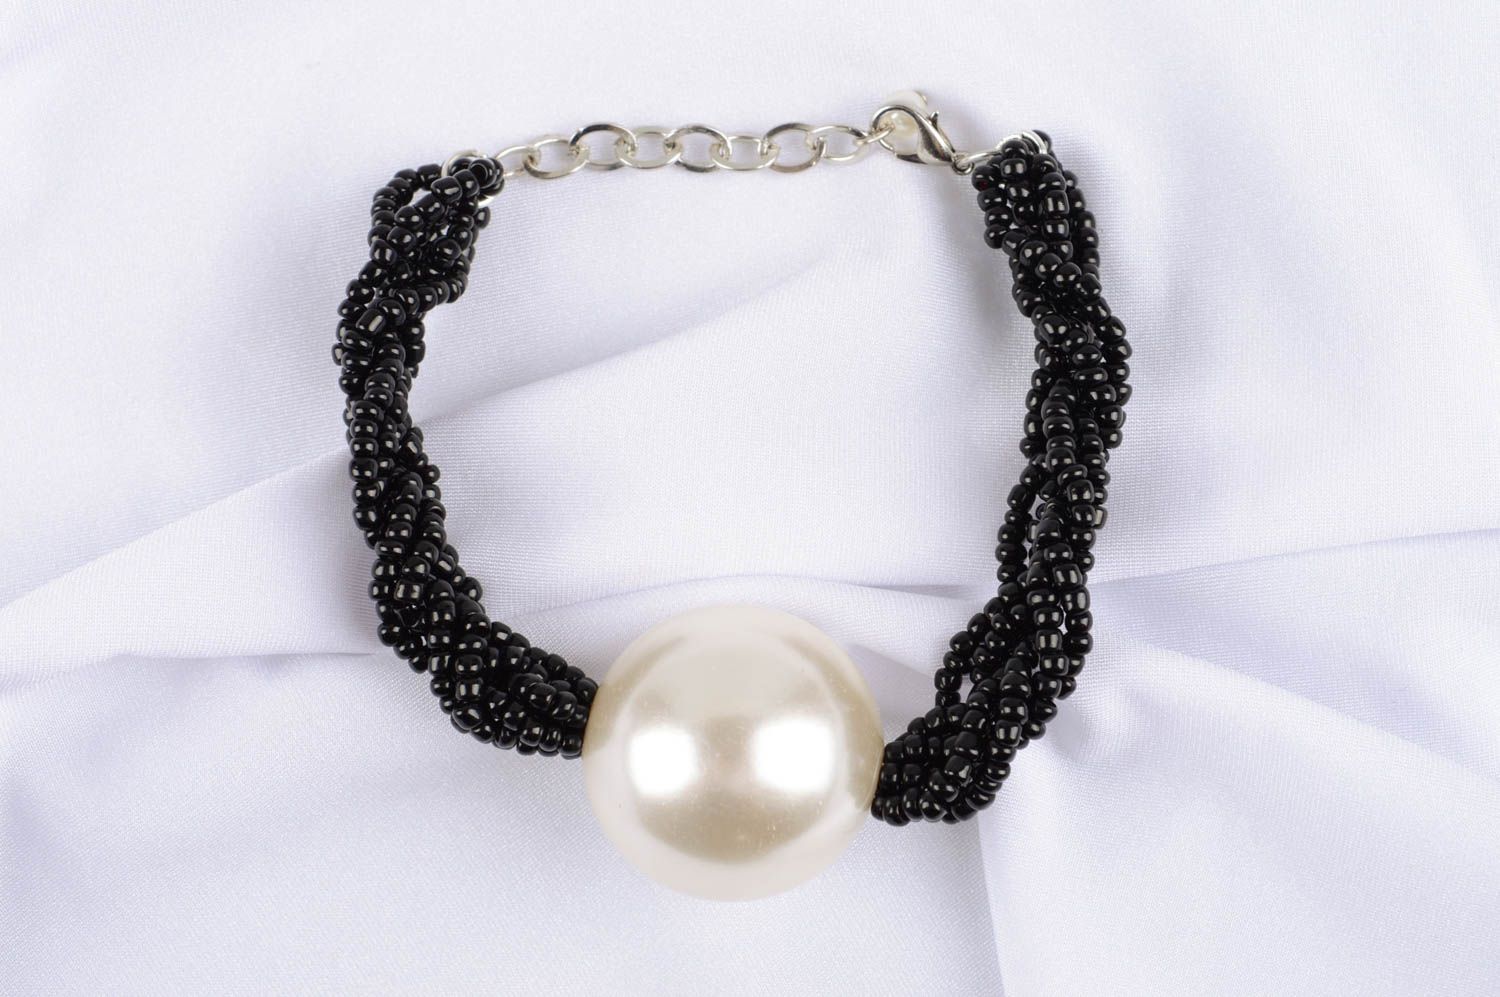 Handmade black and white beads adjustable bracelet for young girls photo 1